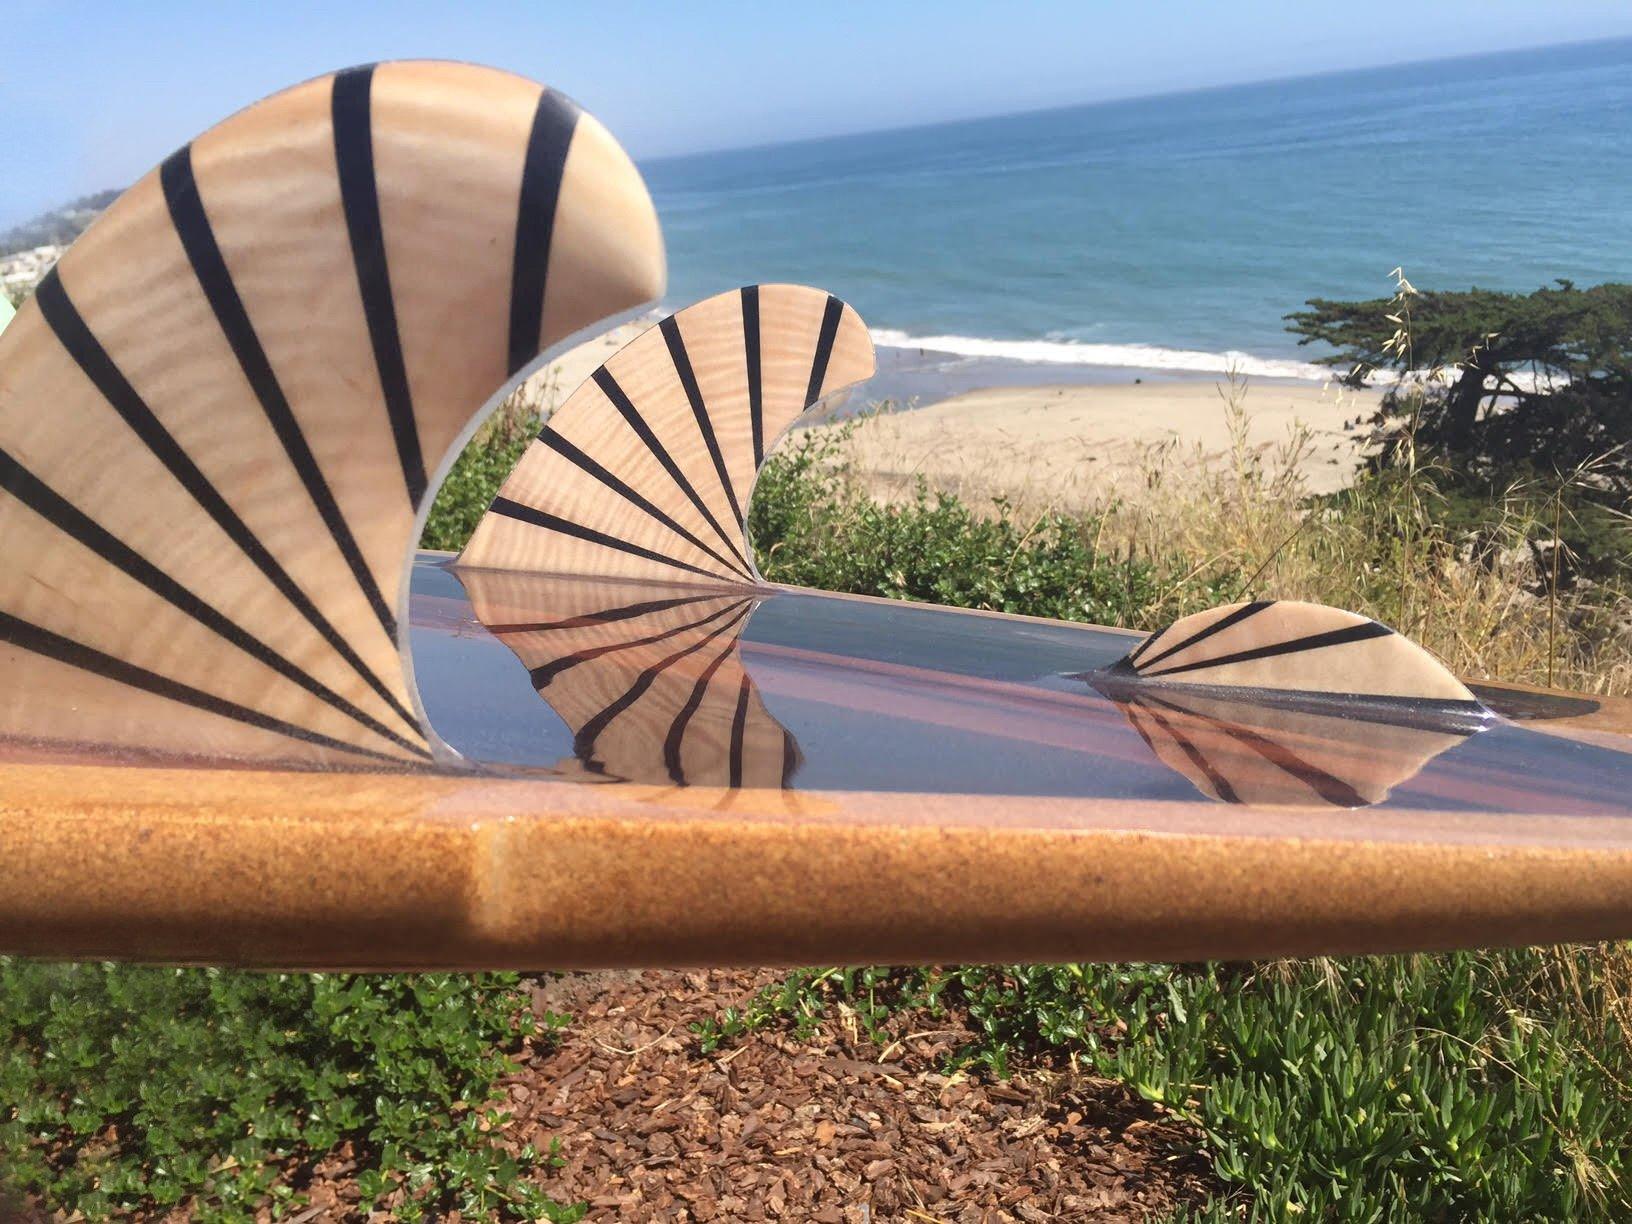 Surfboard - Redwood Hot Tub Swallow Tail 6&